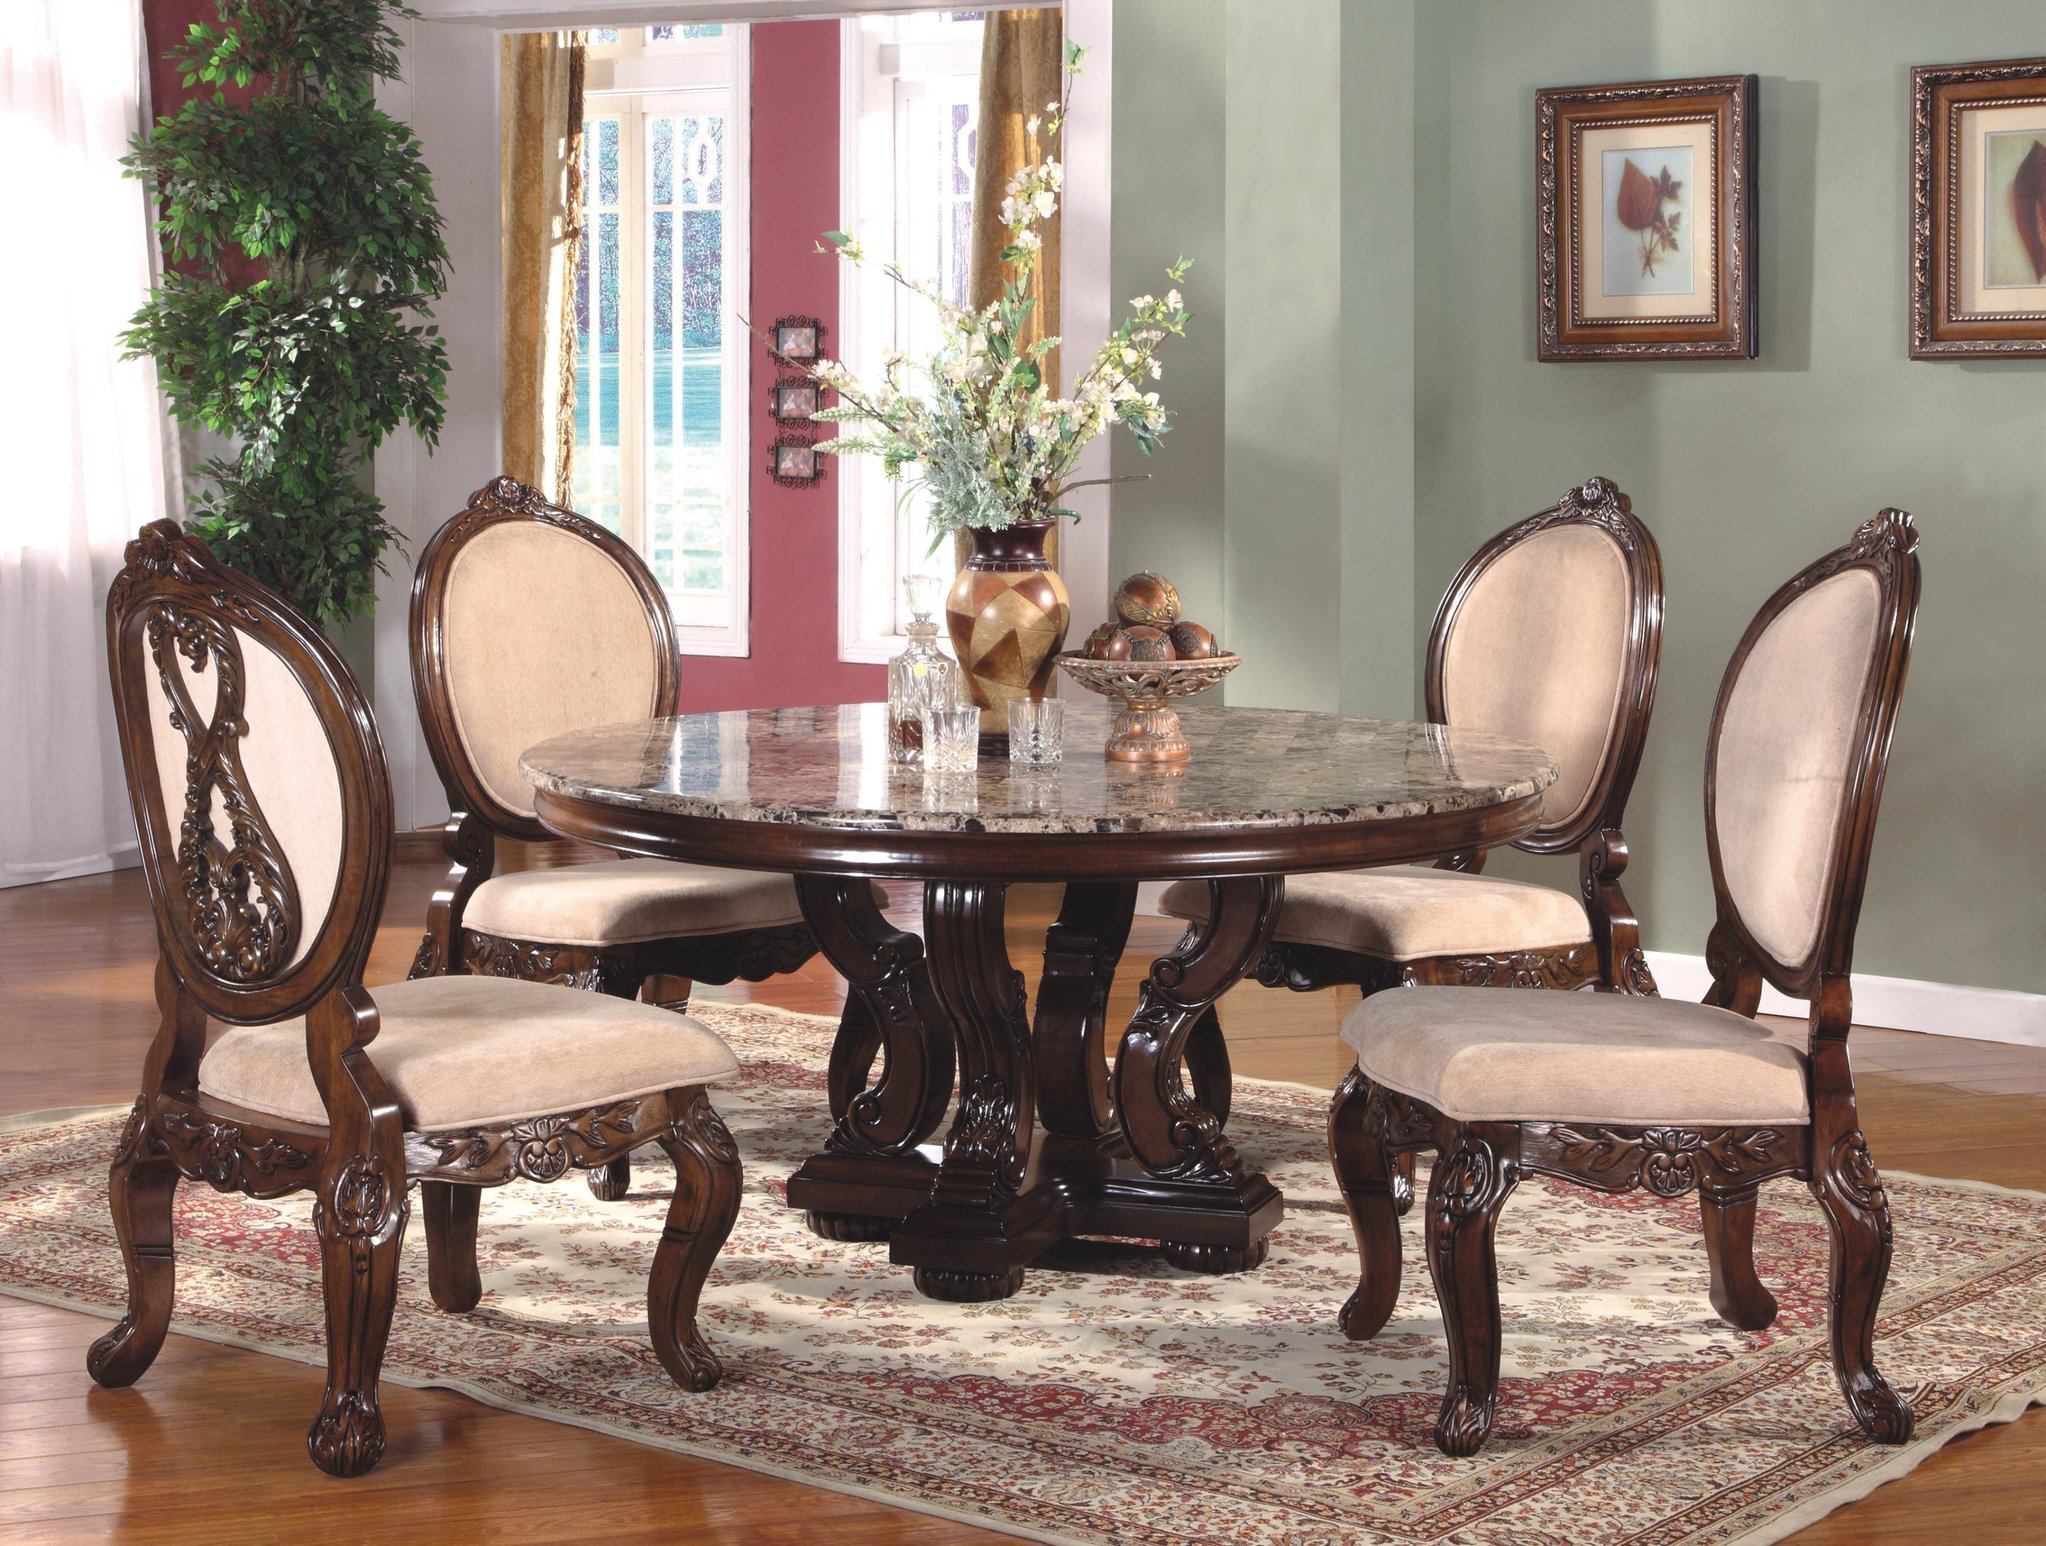 Best French Country Dining Room Set with Round Table u0026 Metal Accents - Formal formal round dining room sets